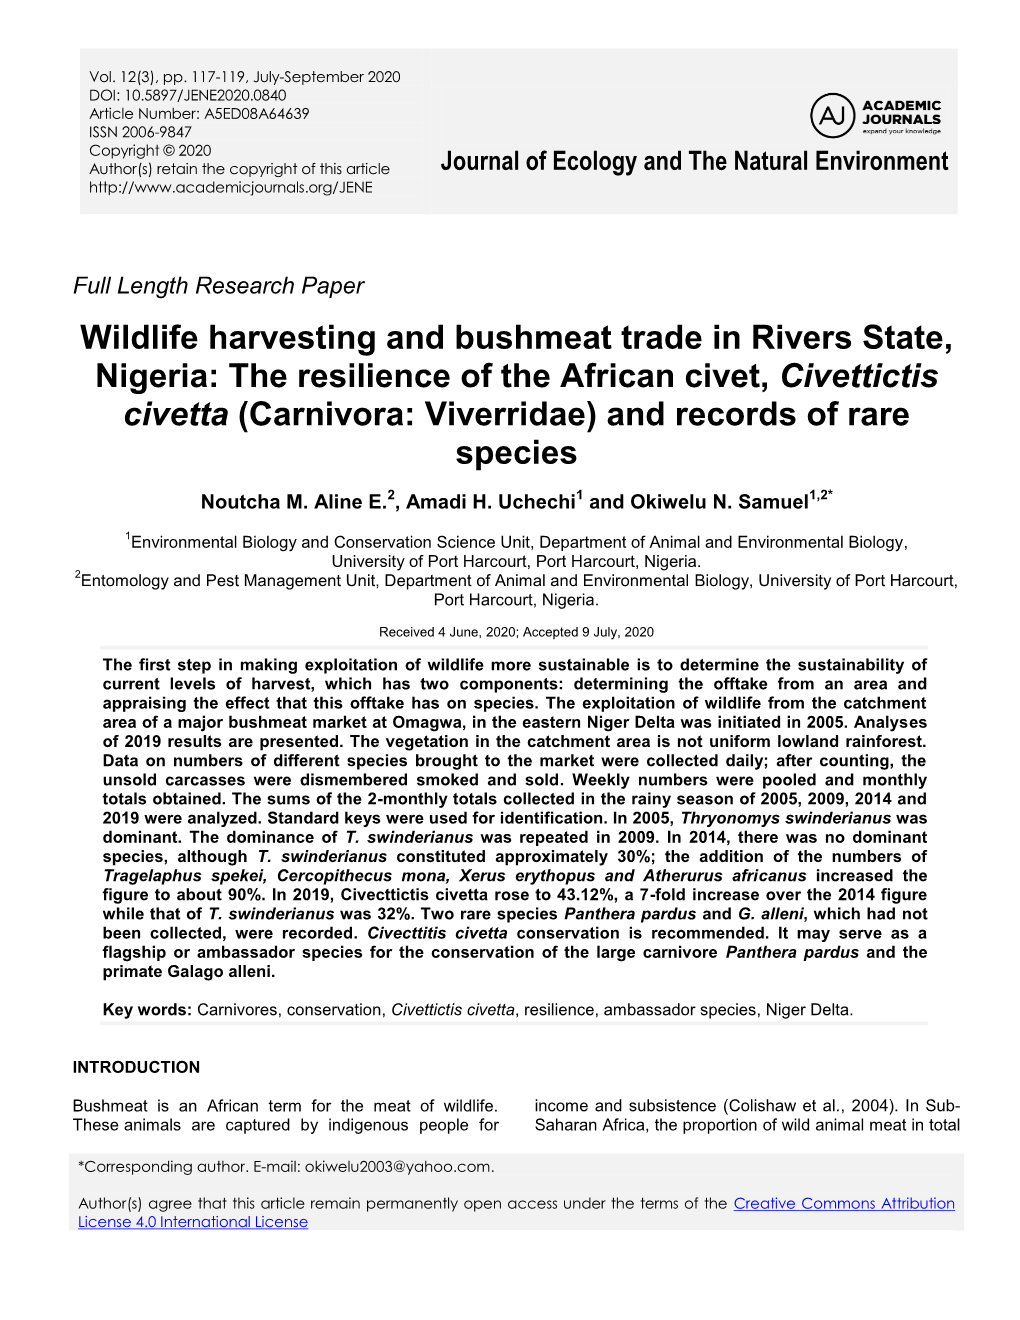 Wildlife Harvesting and Bushmeat Trade in Rivers State, Nigeria